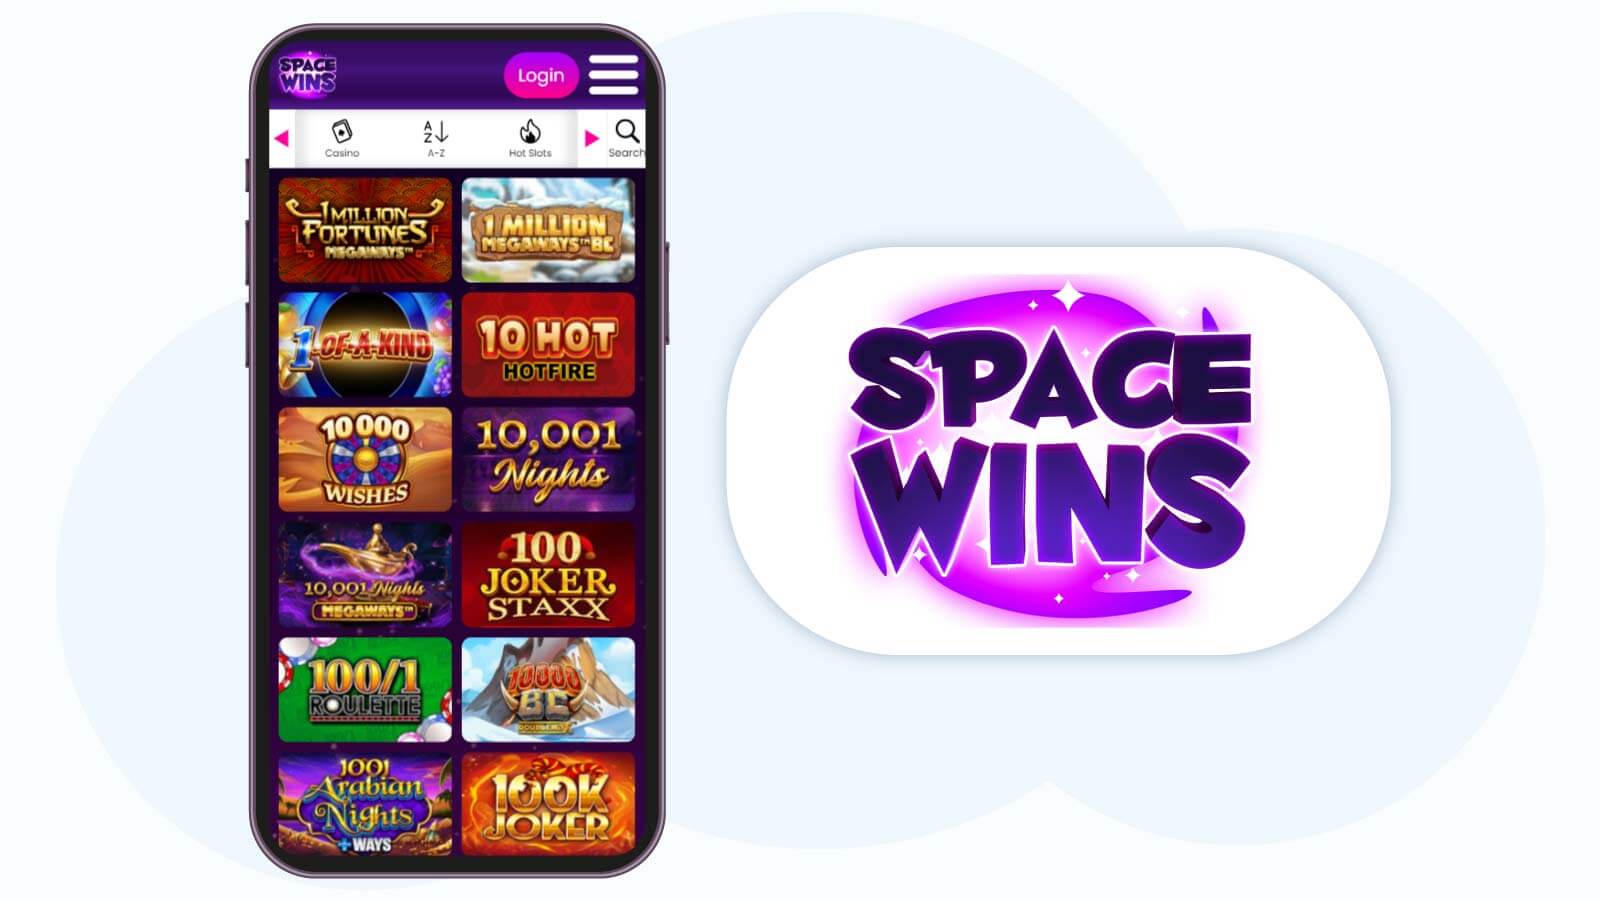 Space Wins Casino Discover Free Spins for Starburst